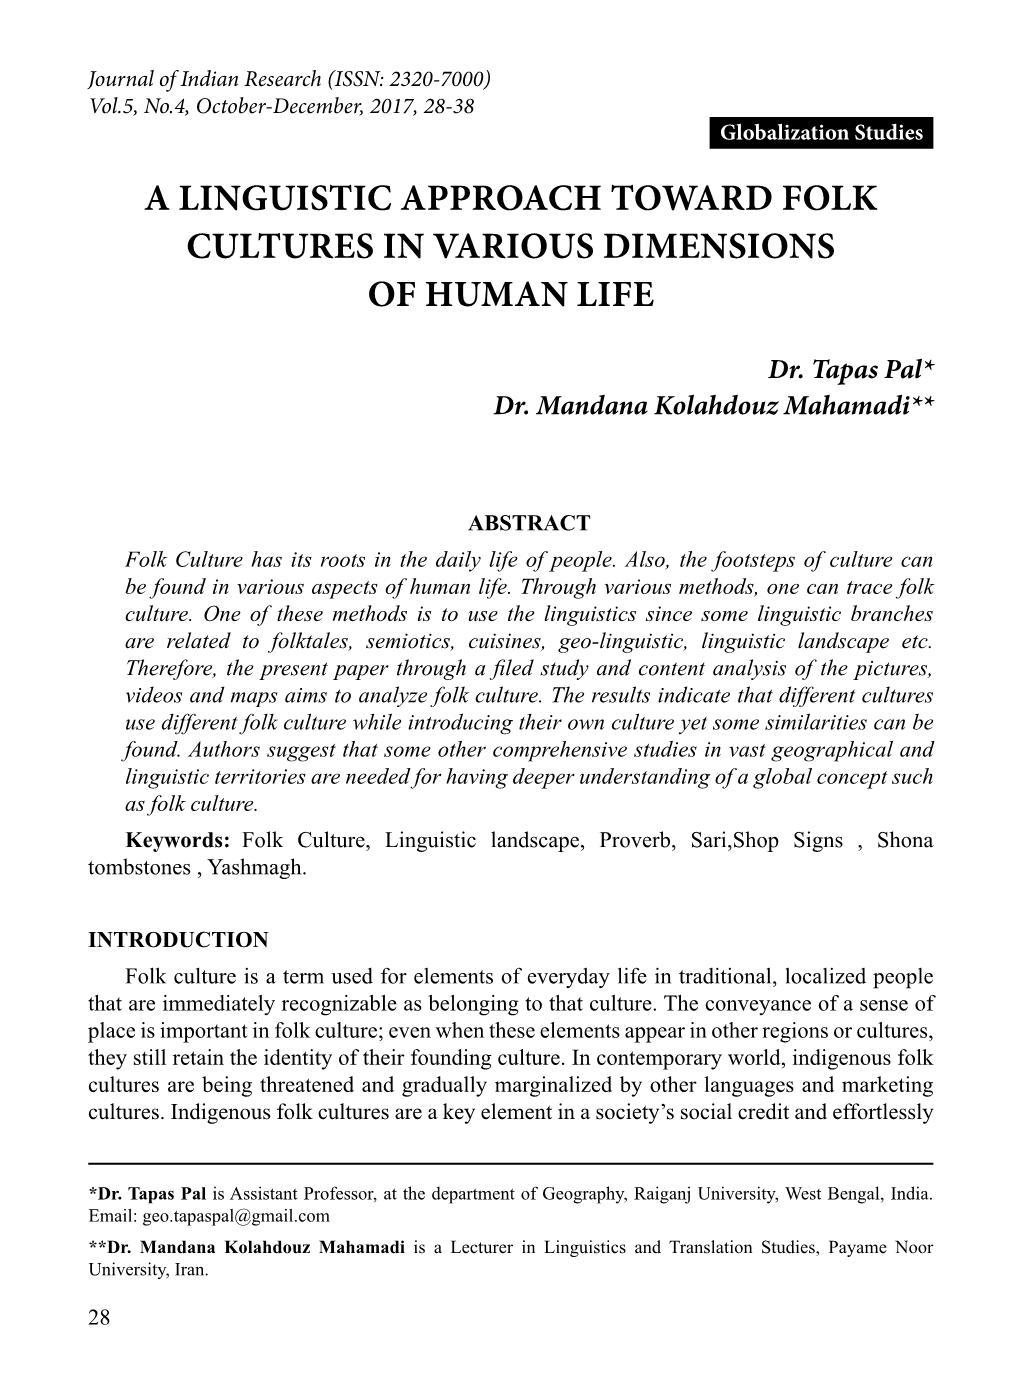 A Linguistic Approach Toward Folk Cultures in Various Dimensions of Human Life